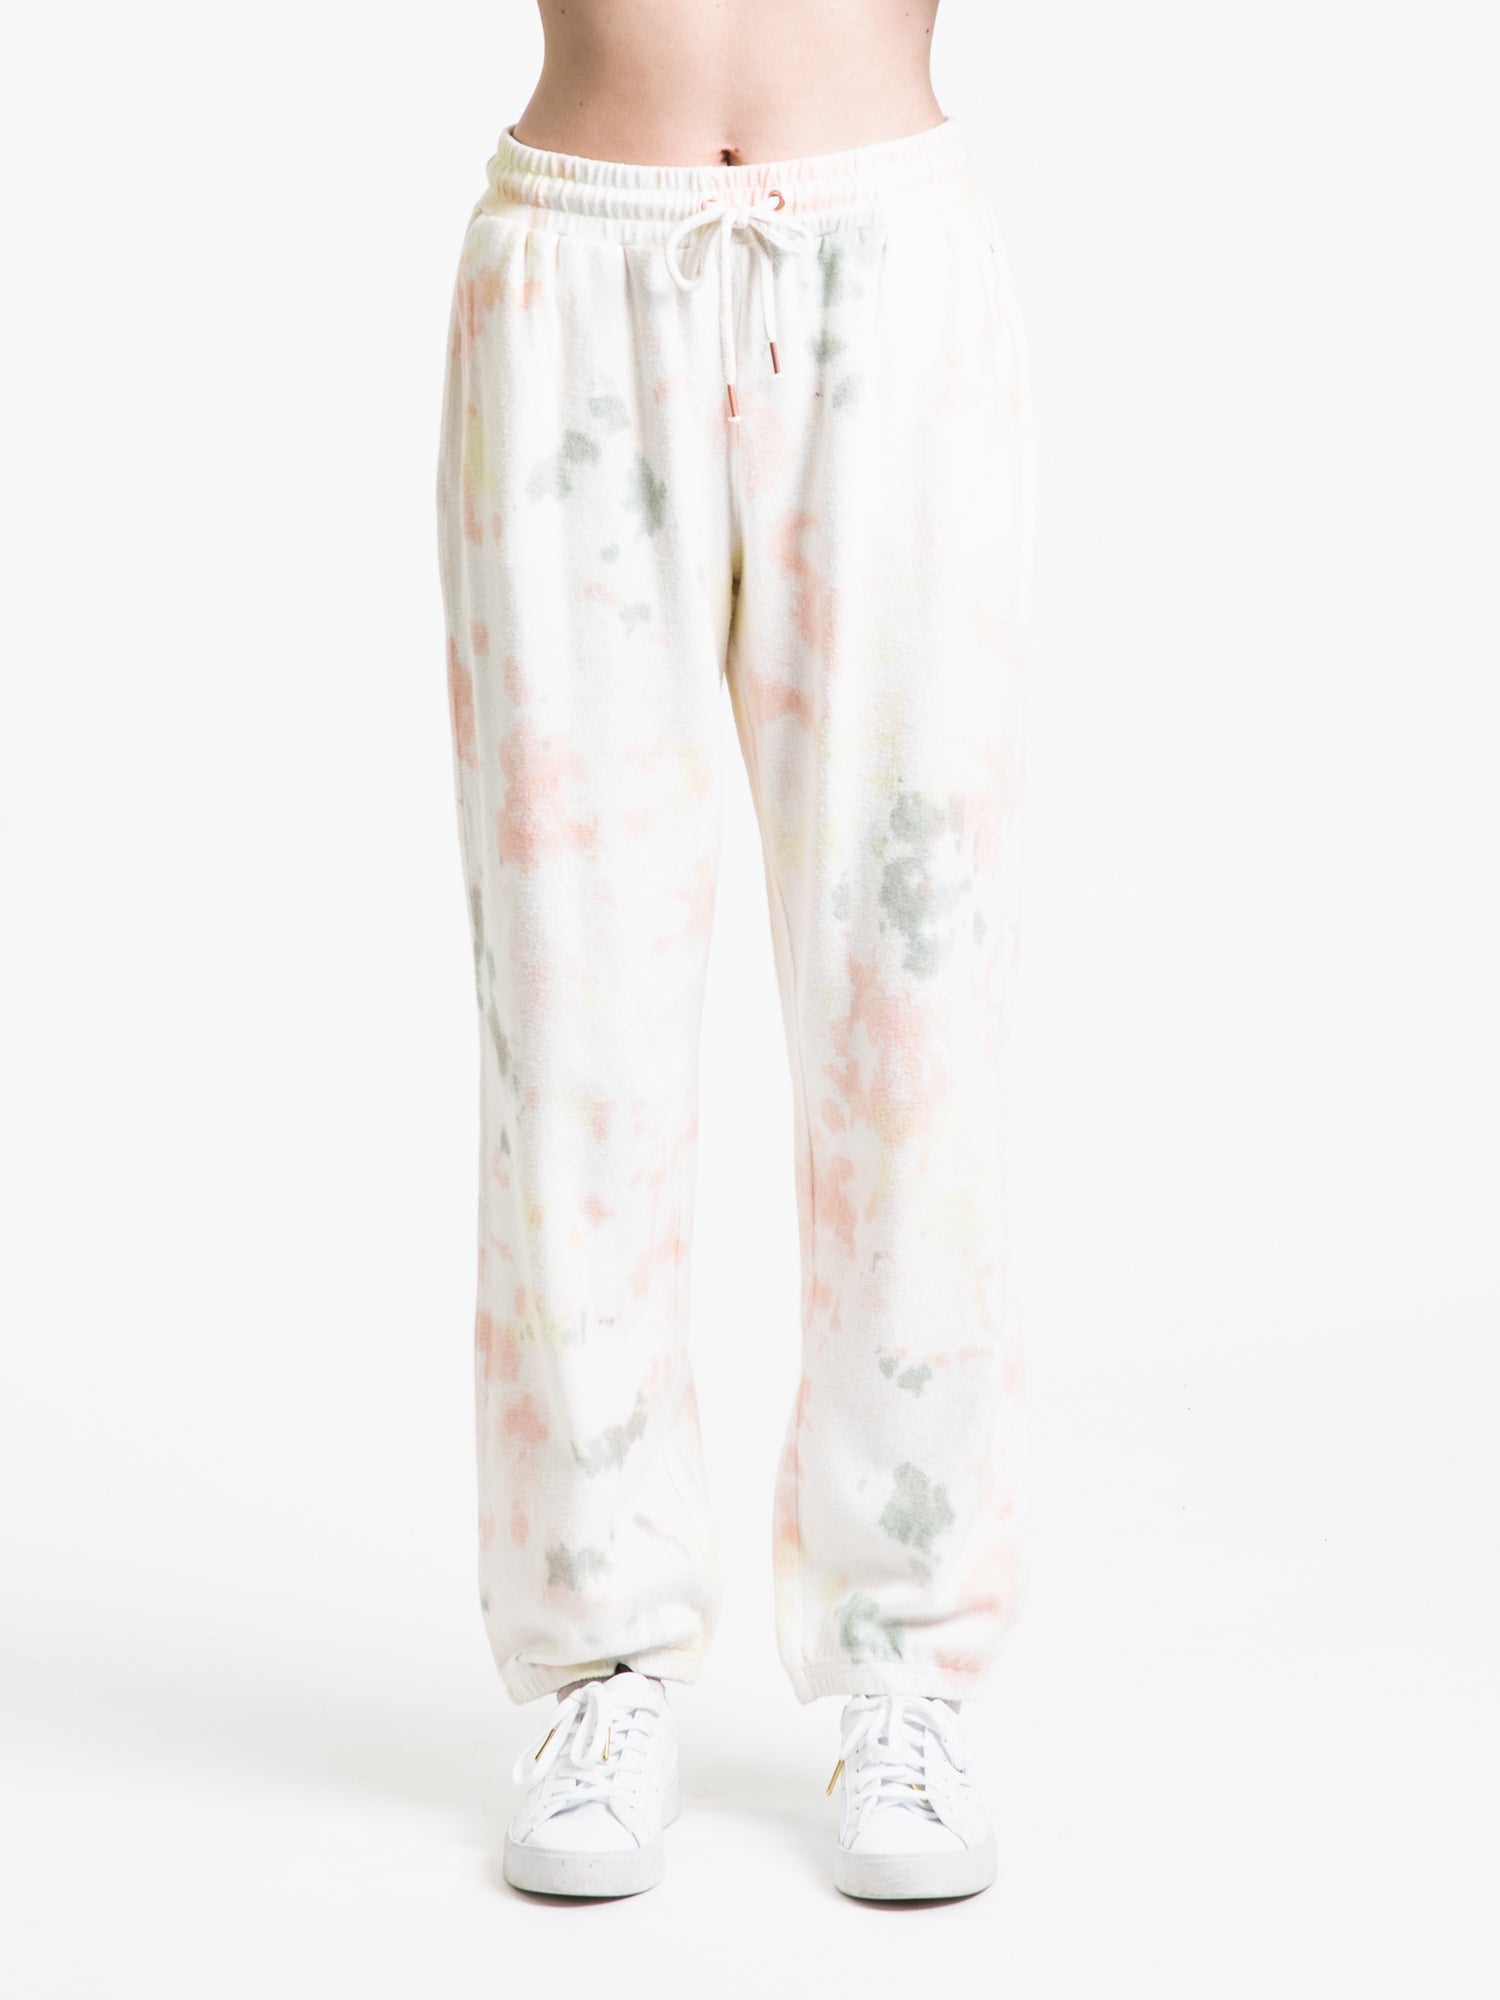 NWT $155 AllSaints [ 8 US ] Pippa Tie Dye Joggers in Yellow/Lilac #G924